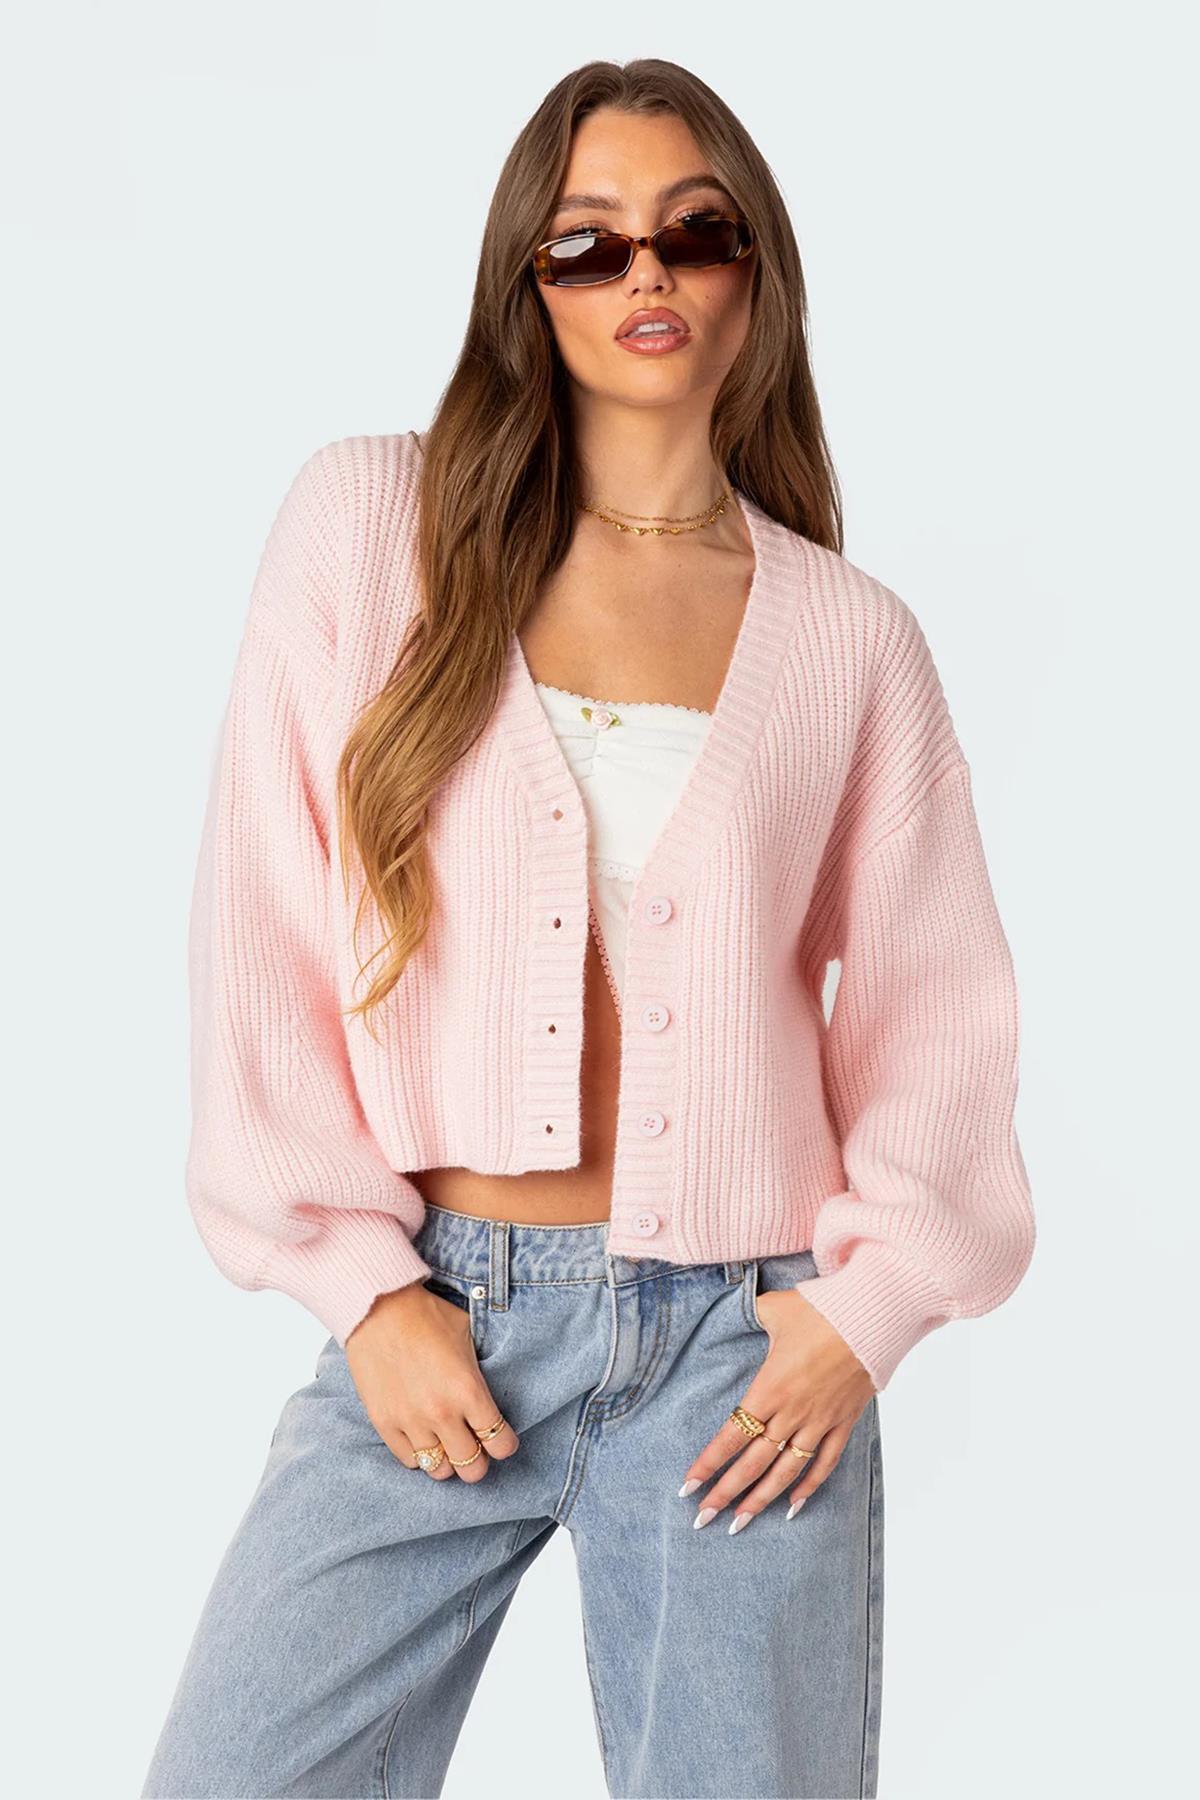 Madmext Pink Buttoned Knitwear Sweater Cardigan